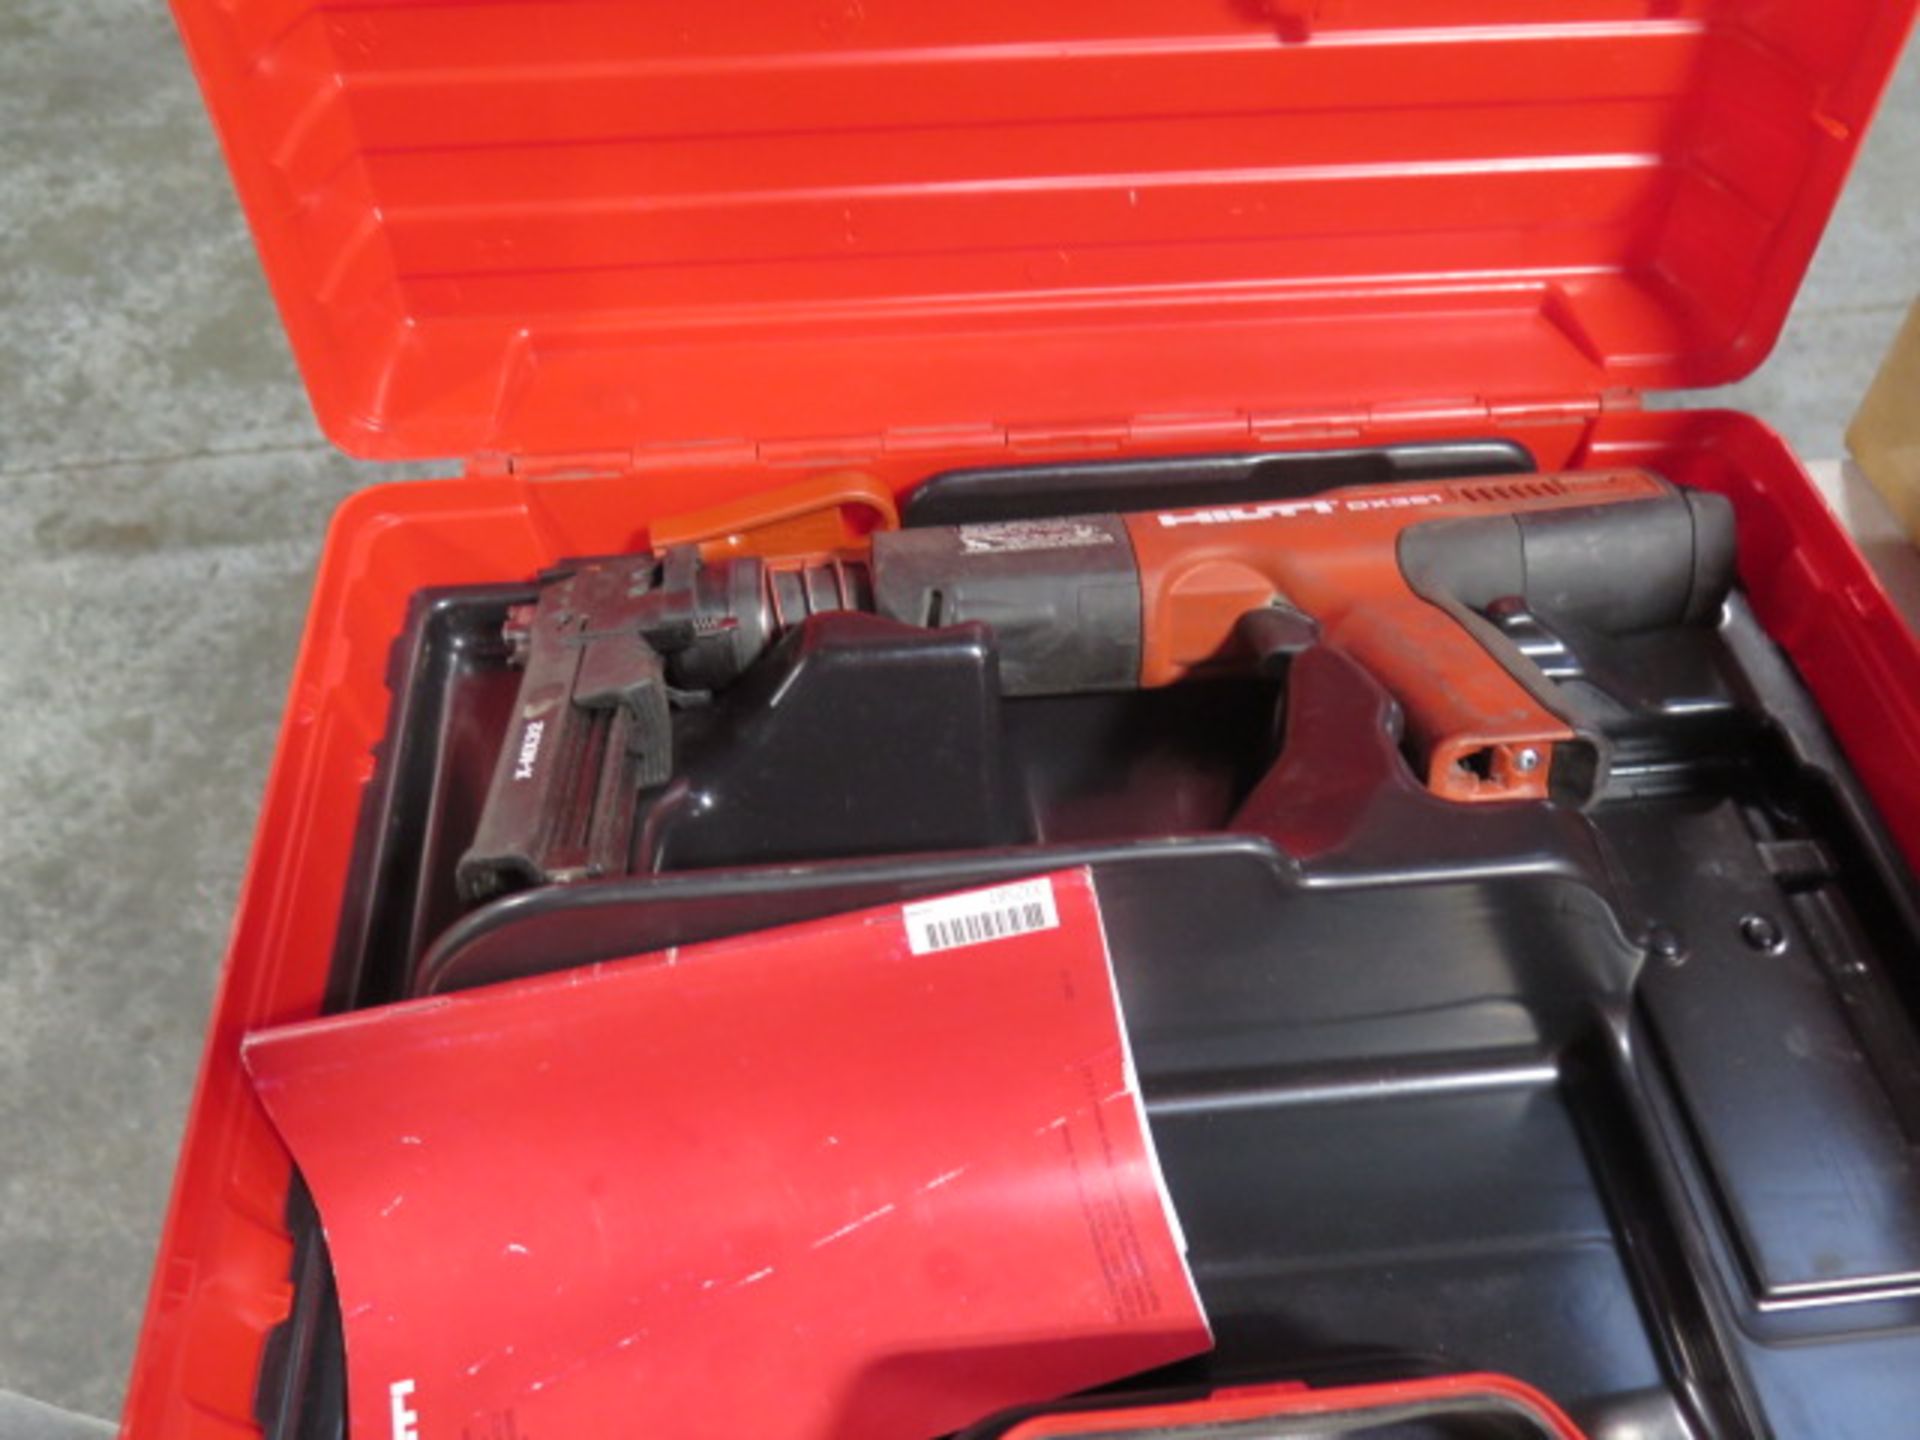 Hilti DX351BT Powder Actuated Guns (4) (SOLD AS-IS - NO WARRANTY) - Image 9 of 12